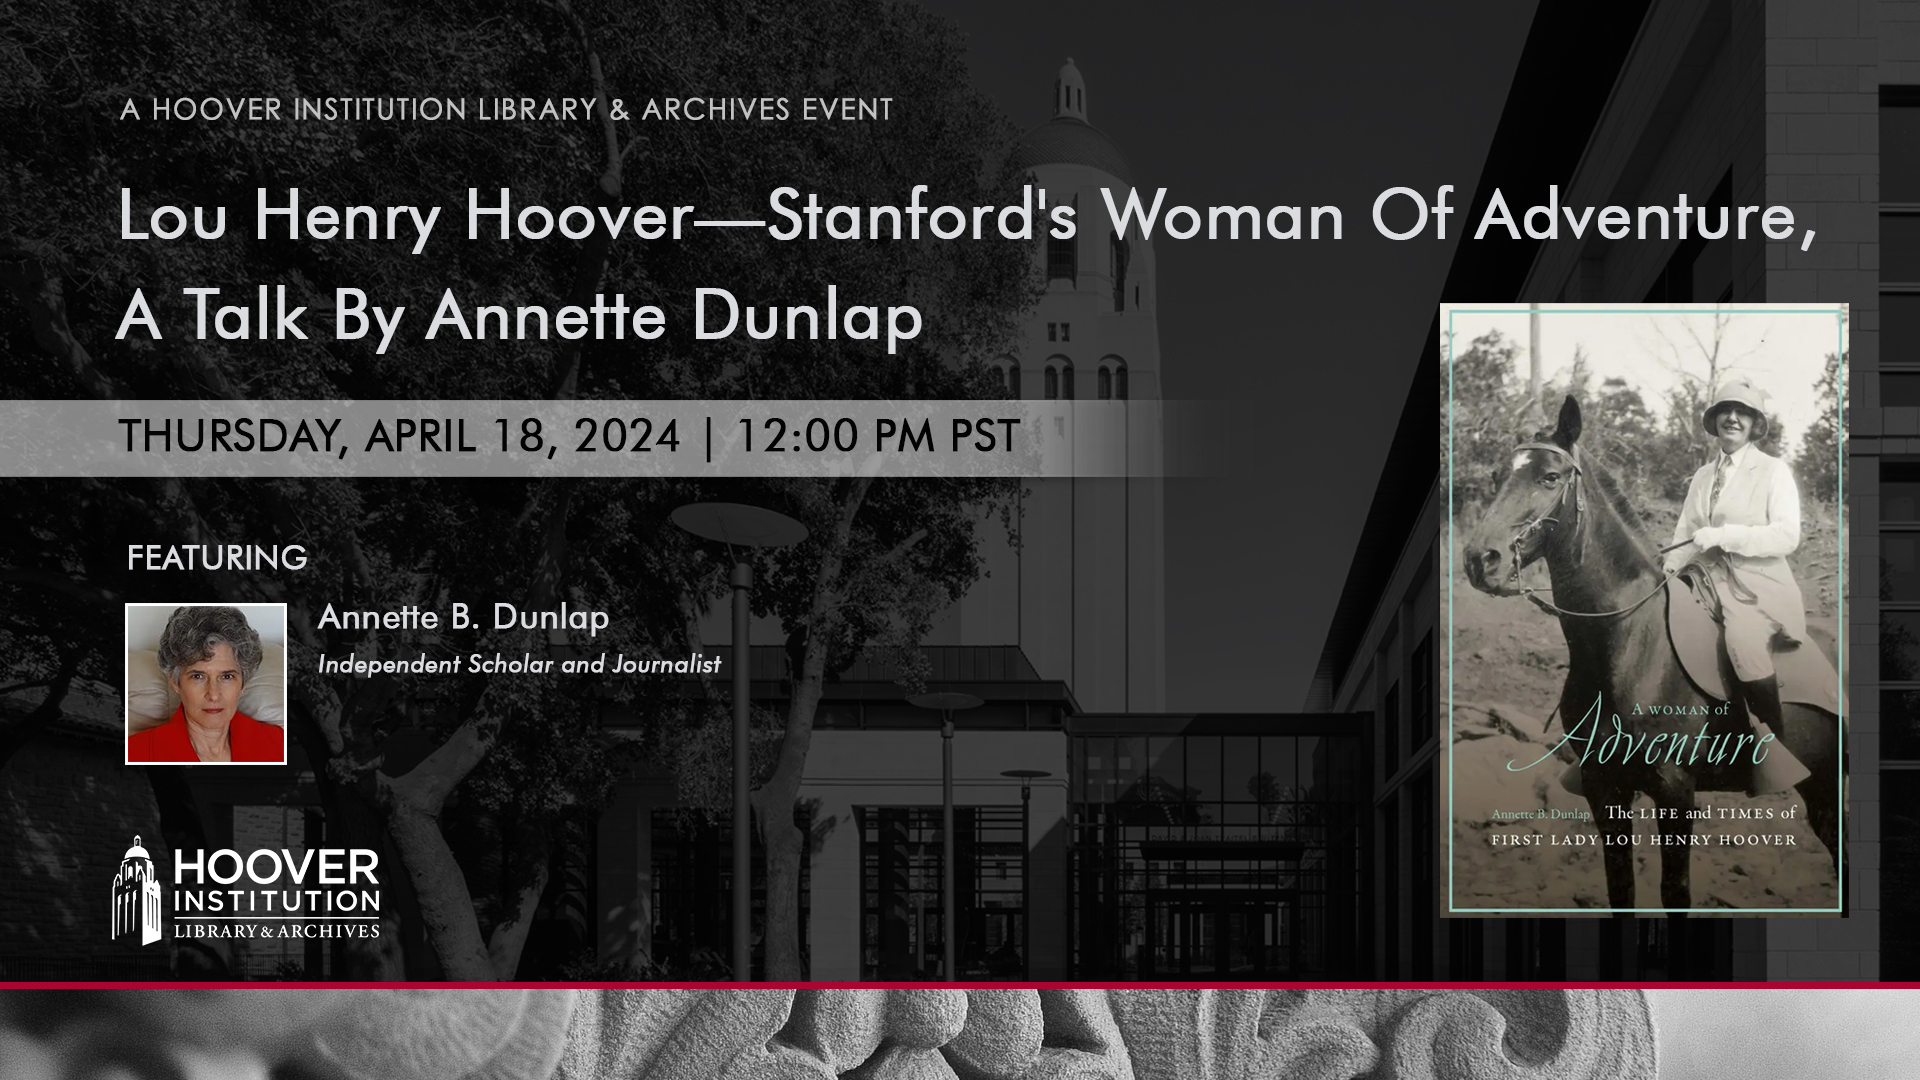 Lou Henry Hoover—Stanford's Woman Of Adventure, A Talk By Annette Dunlap